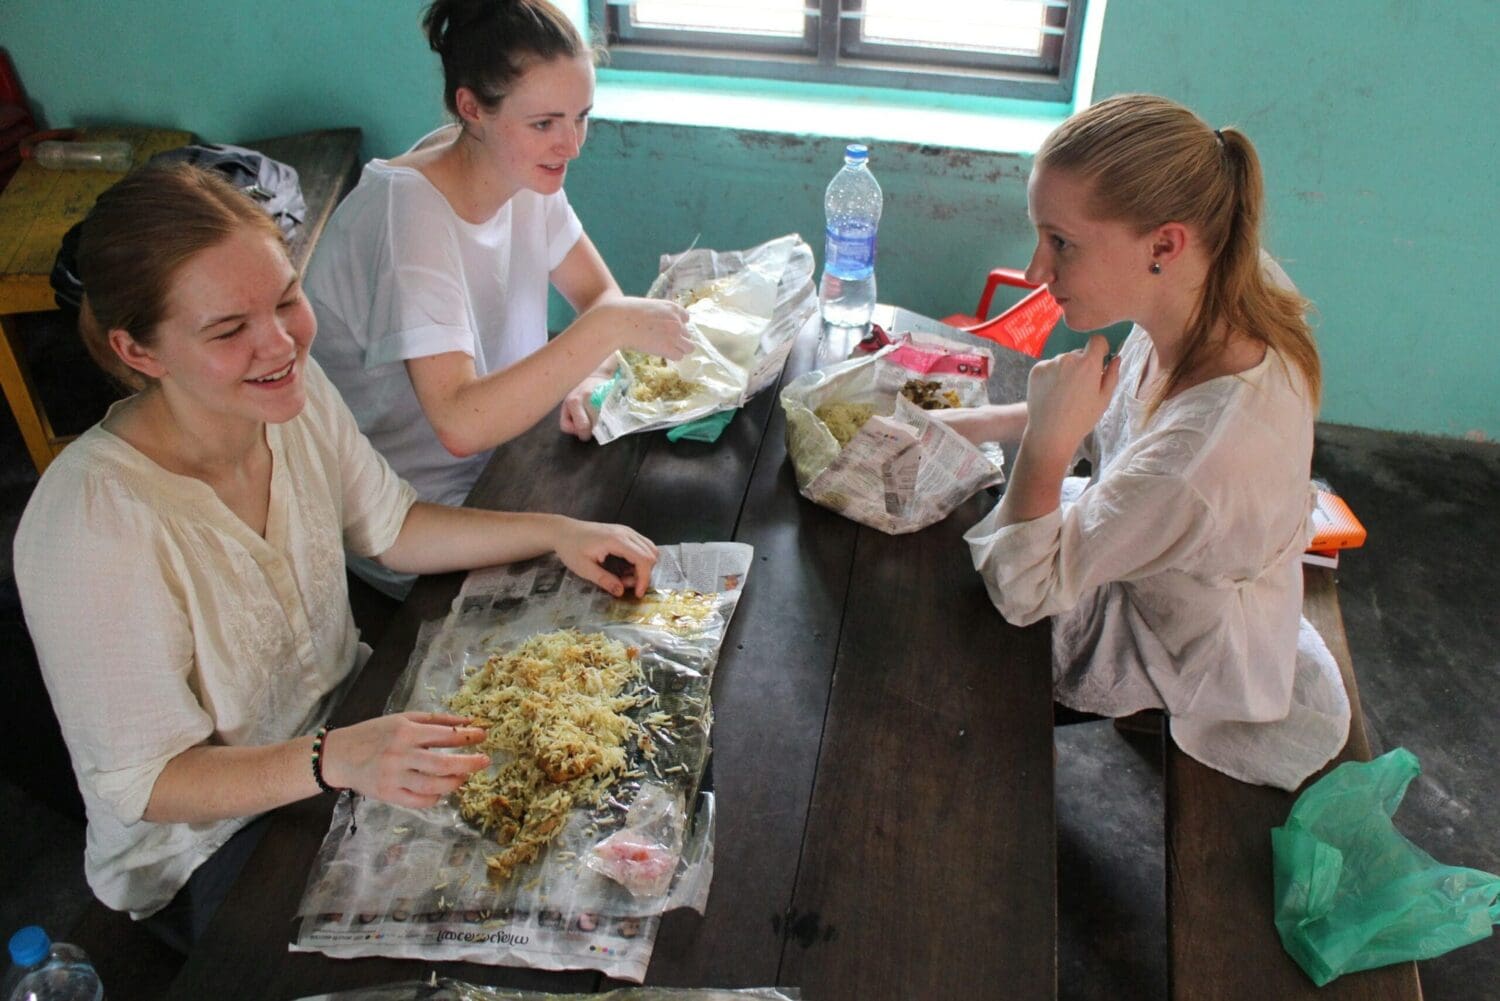 Volunteers in India enjoying a meal together